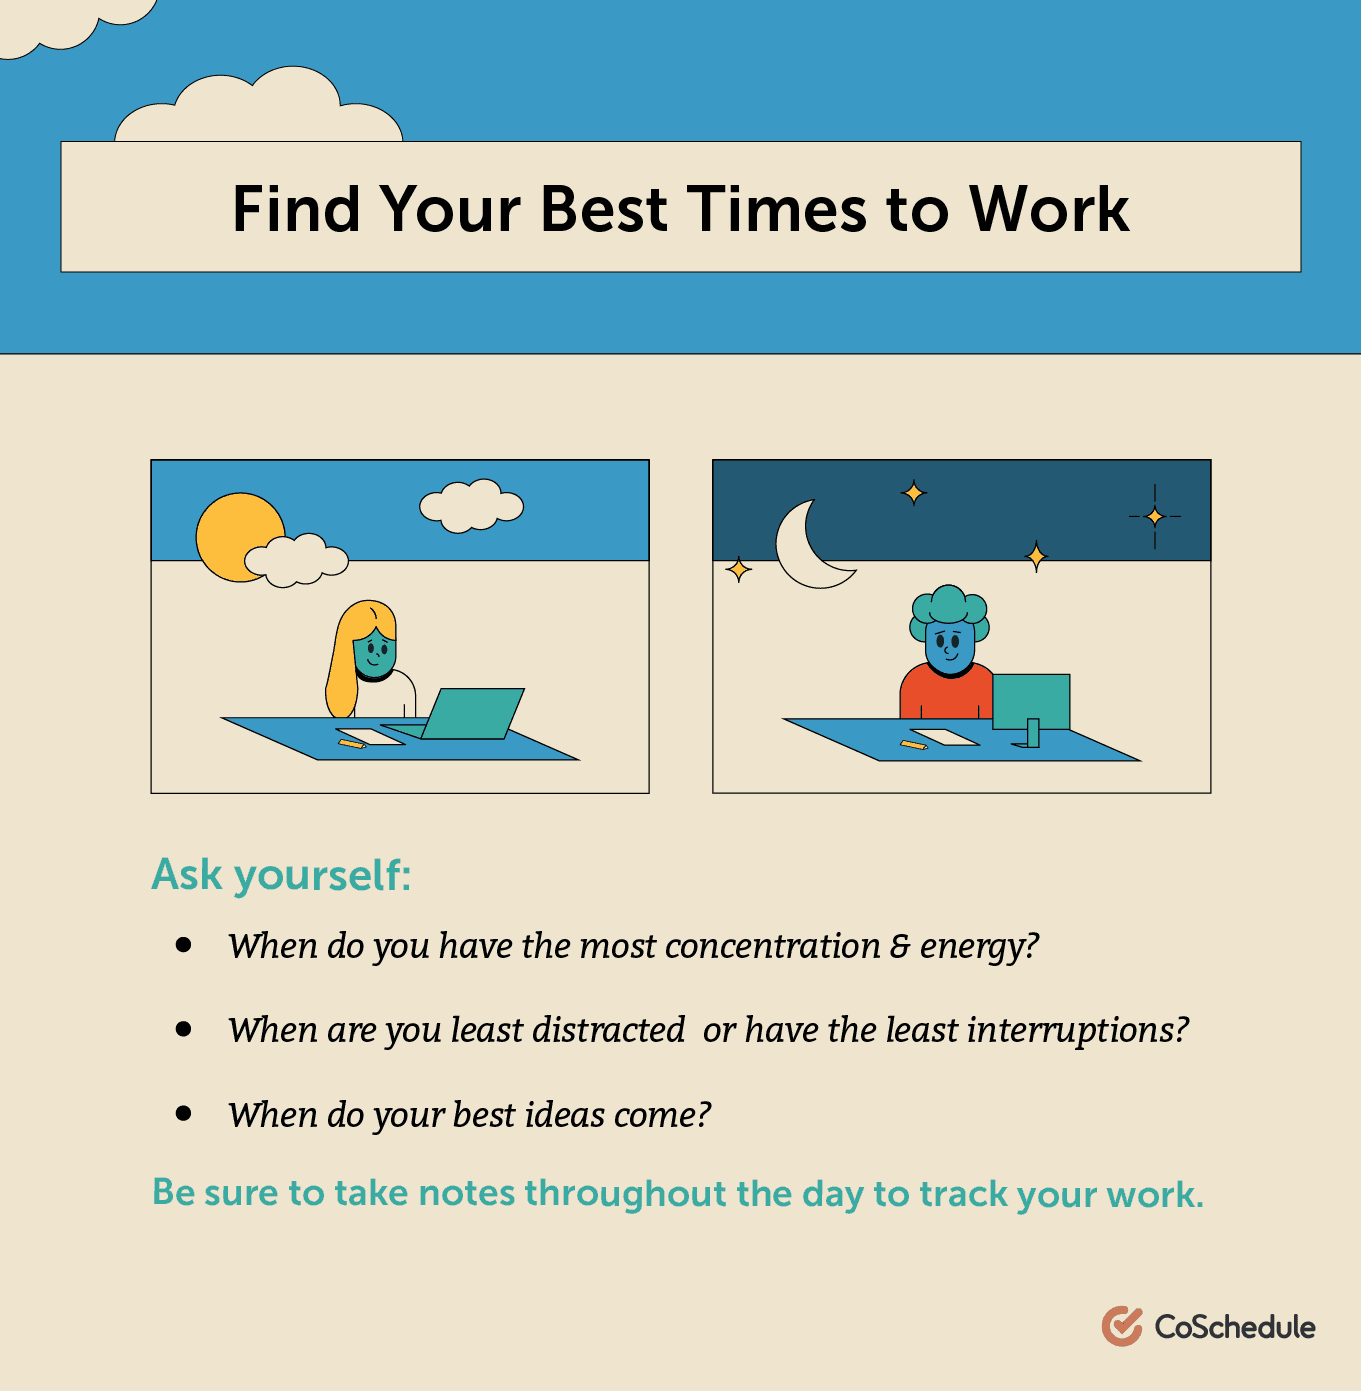 Find your best times to work